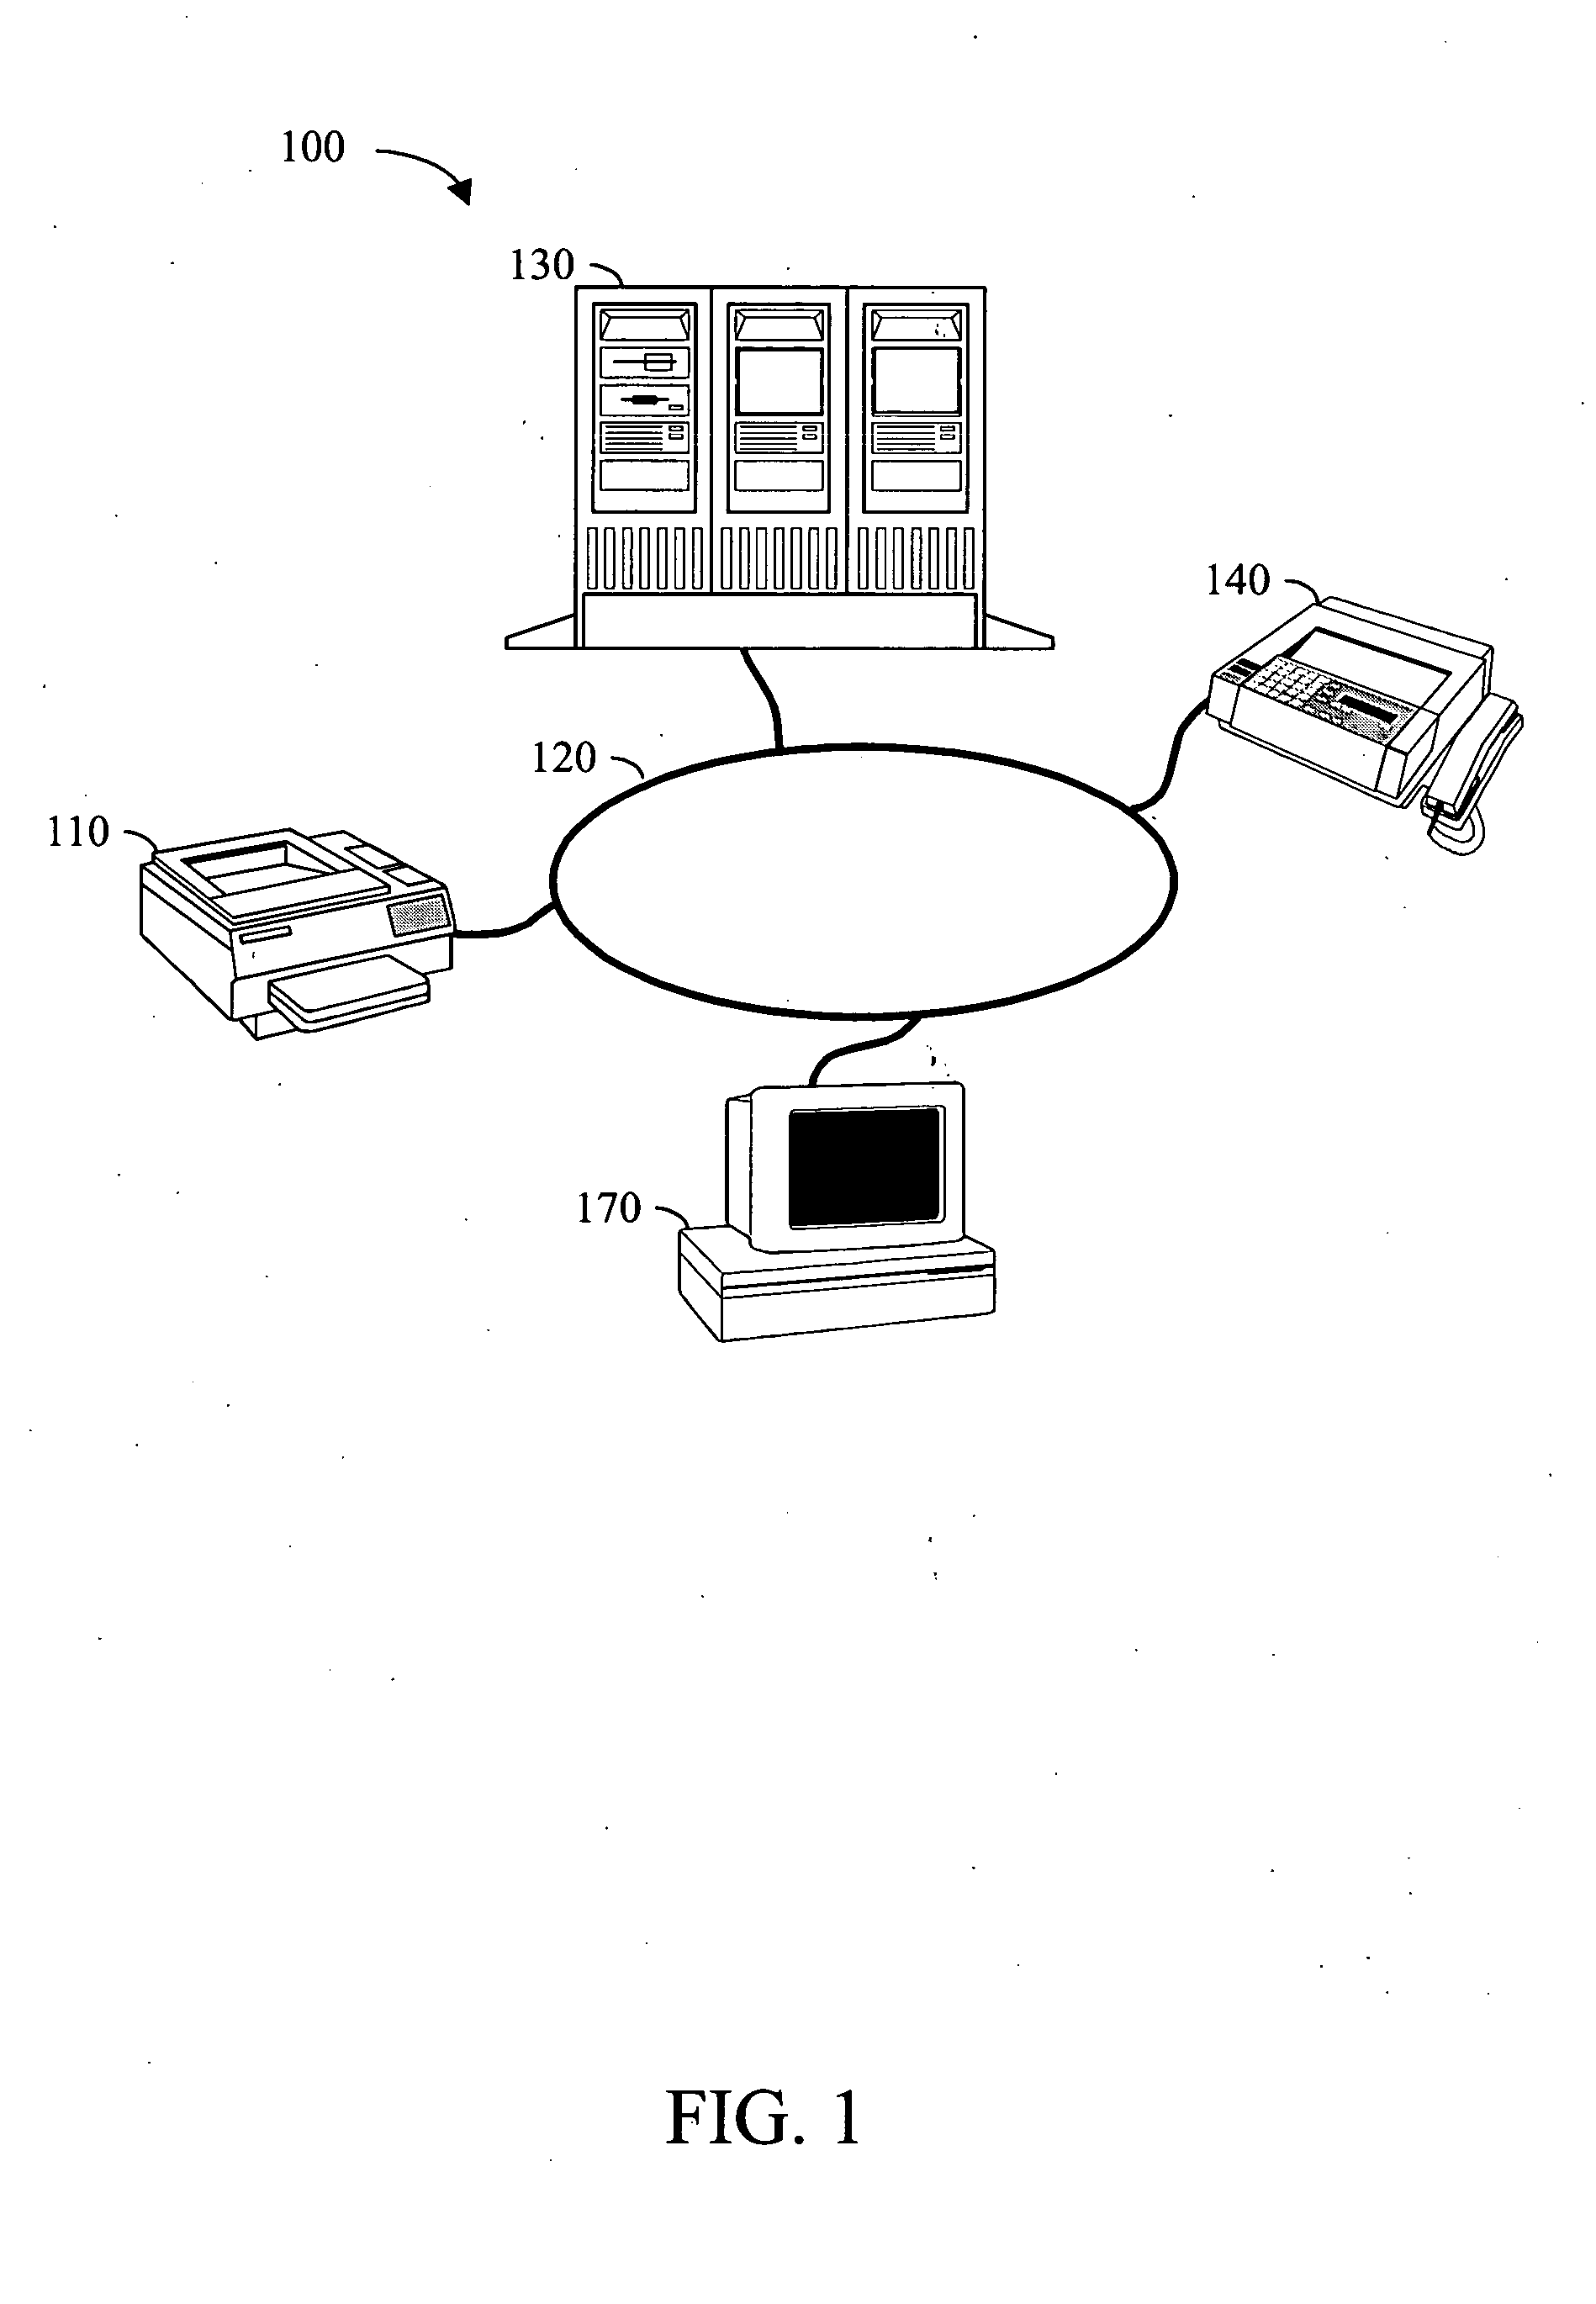 Apparatus and method for convenient and secure access to websites